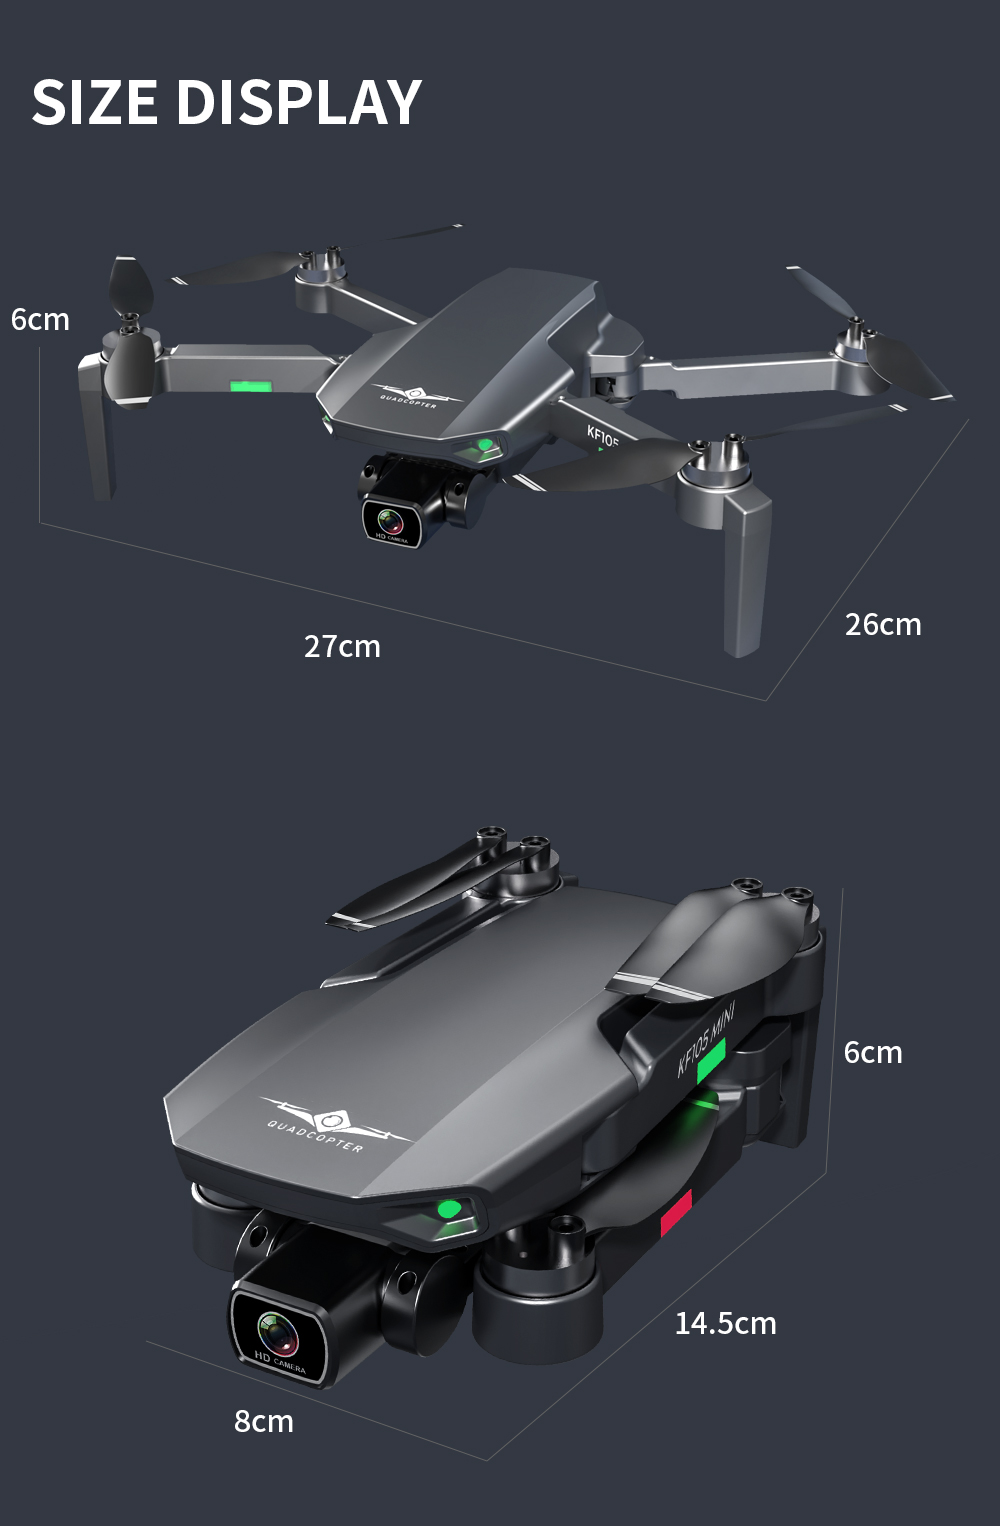 KF-KF105-GPS-5G-WiFi-FPV-with-4K-HD-ESC-Dual-Camera-Visual-Obstacle-Avoidance-Brushless-Foldable-RC--1916966-19